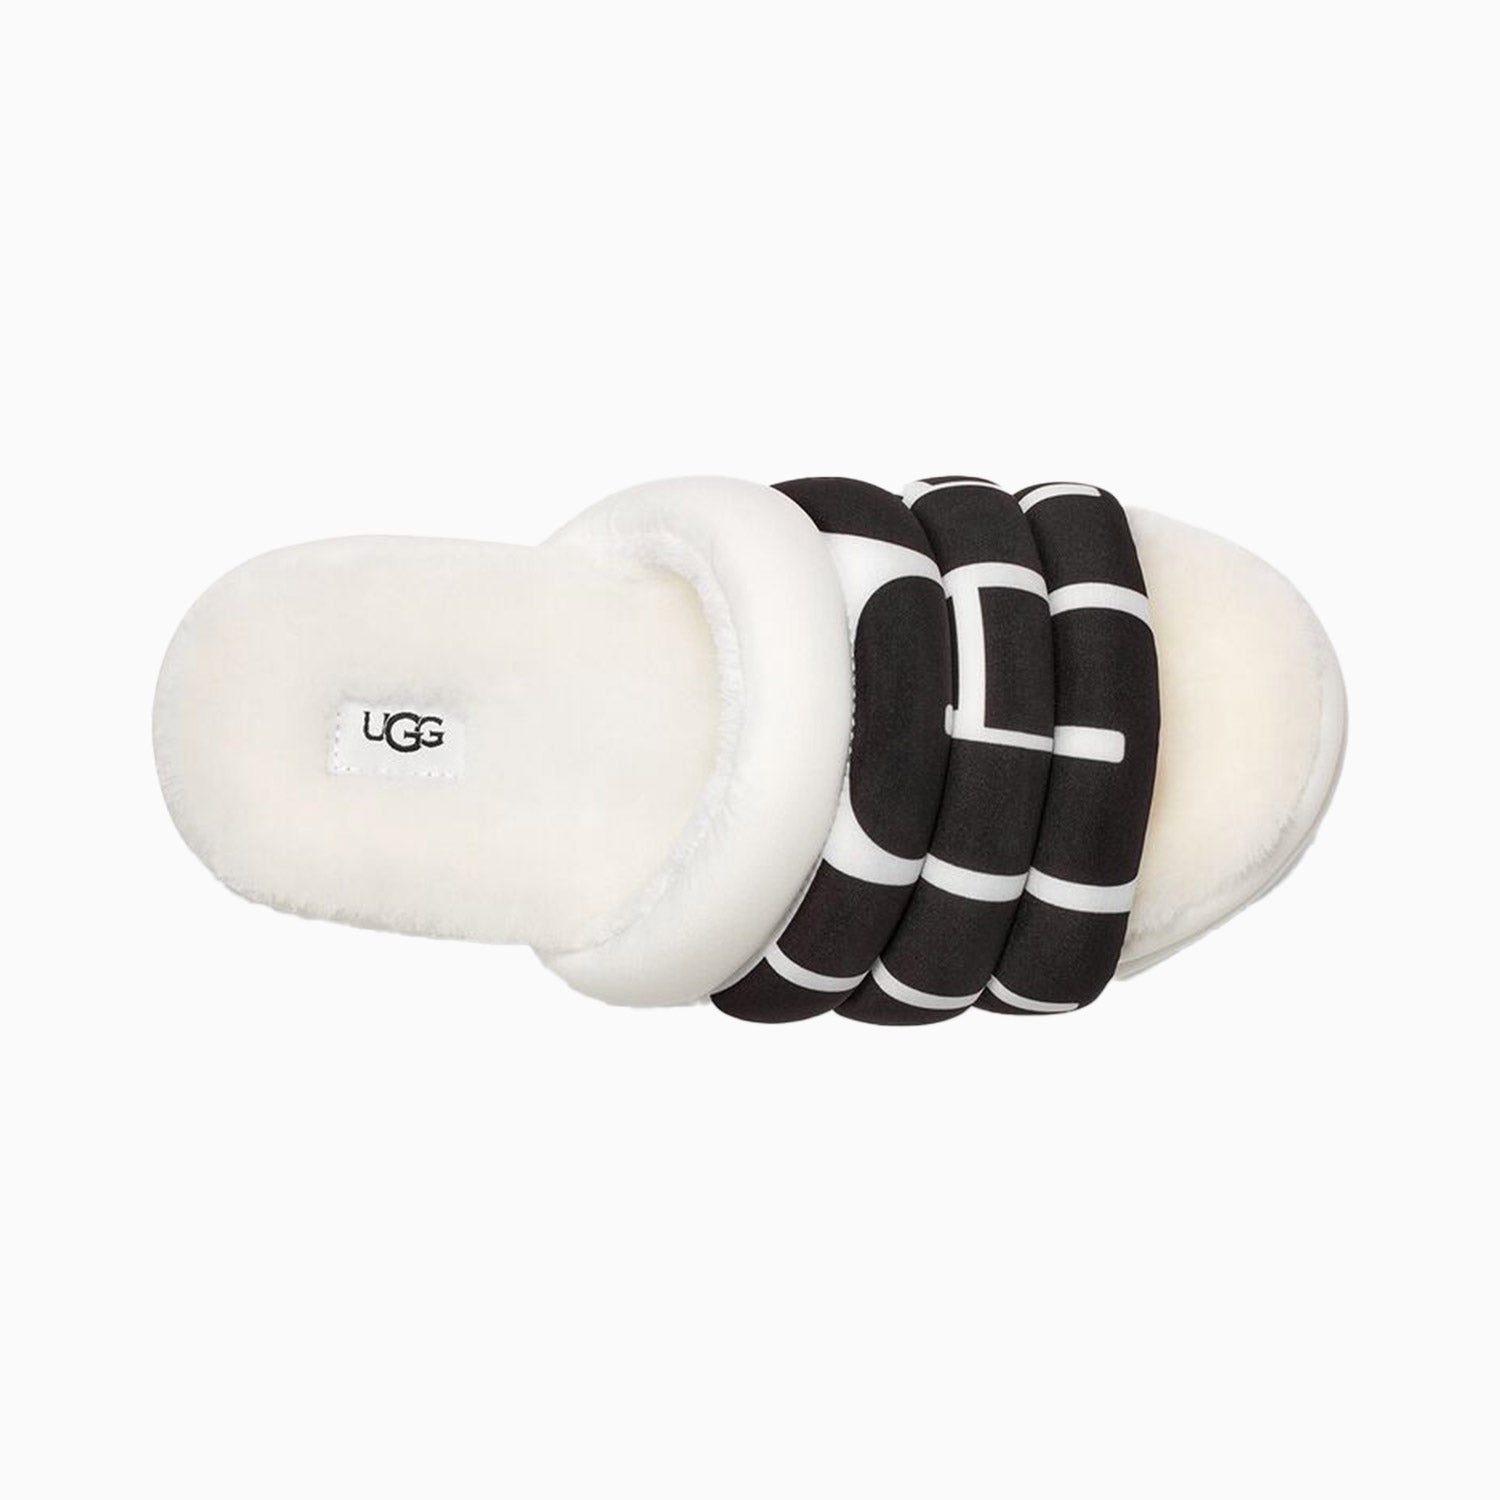 UGG Women's Maxi Slide - Color: Black, White, Pink Scallop - Tops and Bottoms USA -